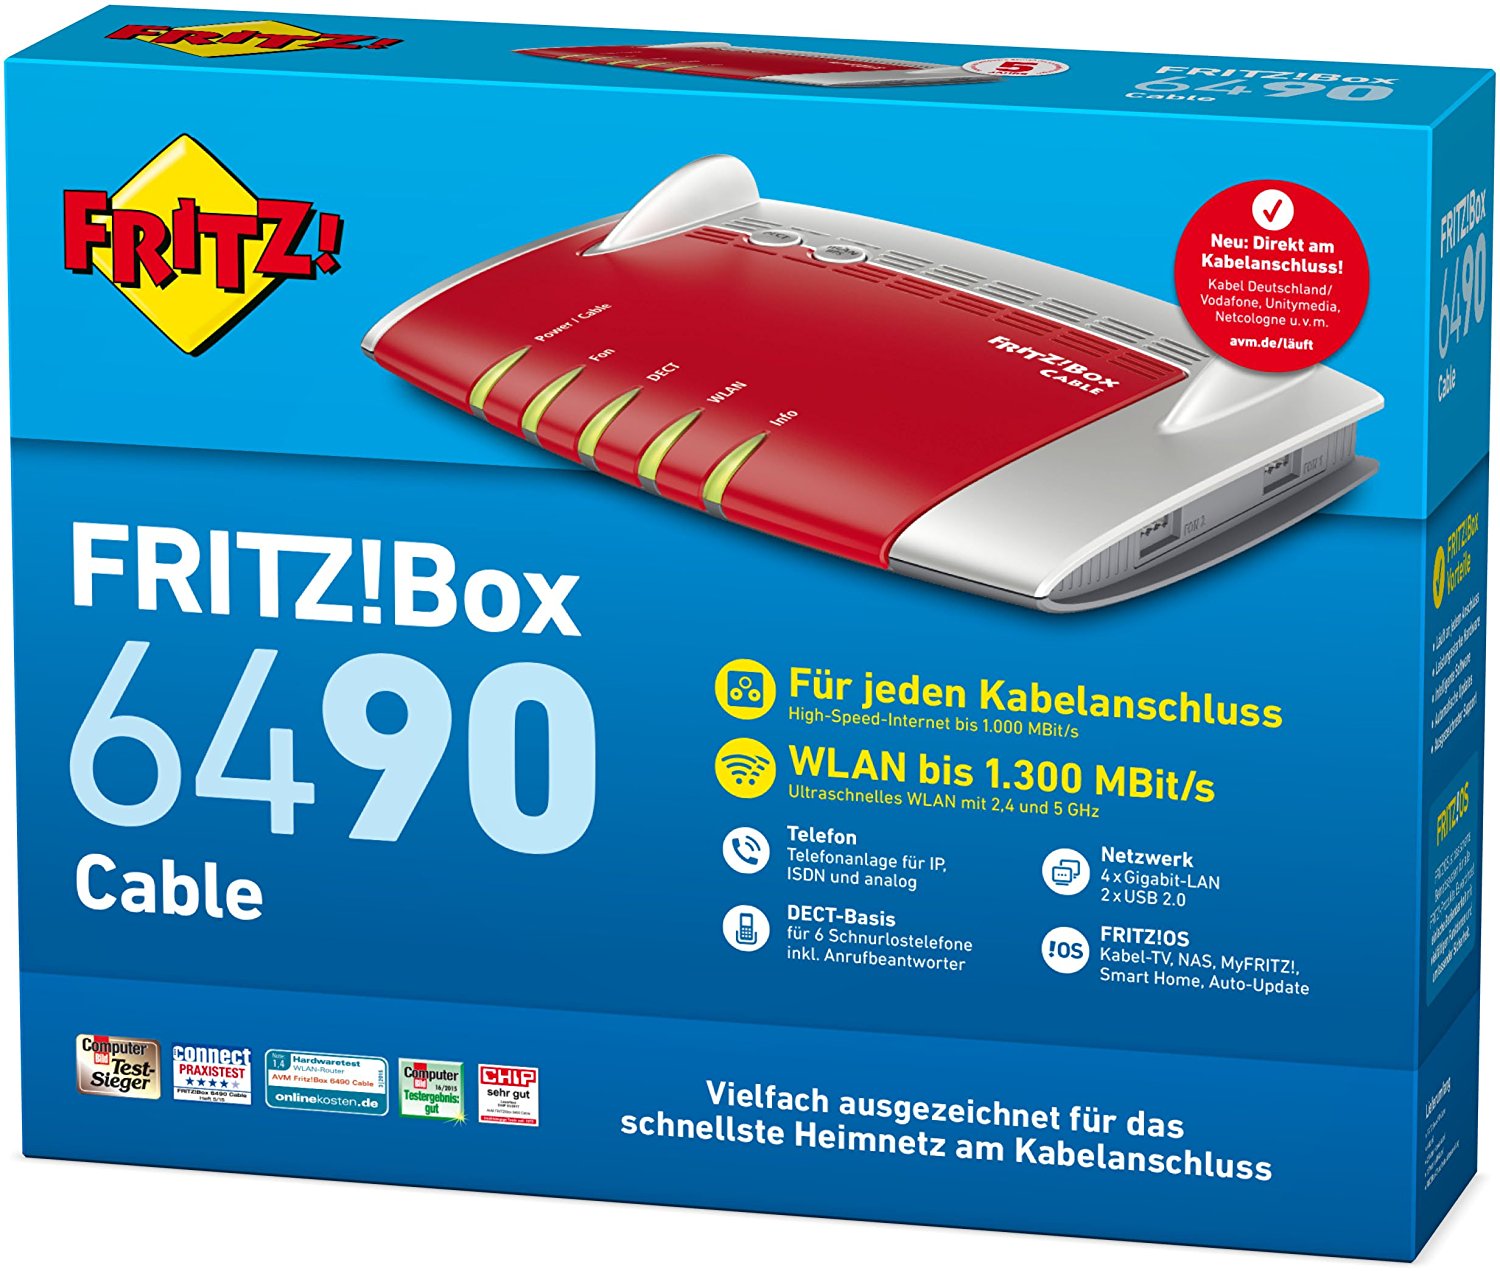 AVM FRITZ!Box 6490 Cable Kabel-WLAN-Router